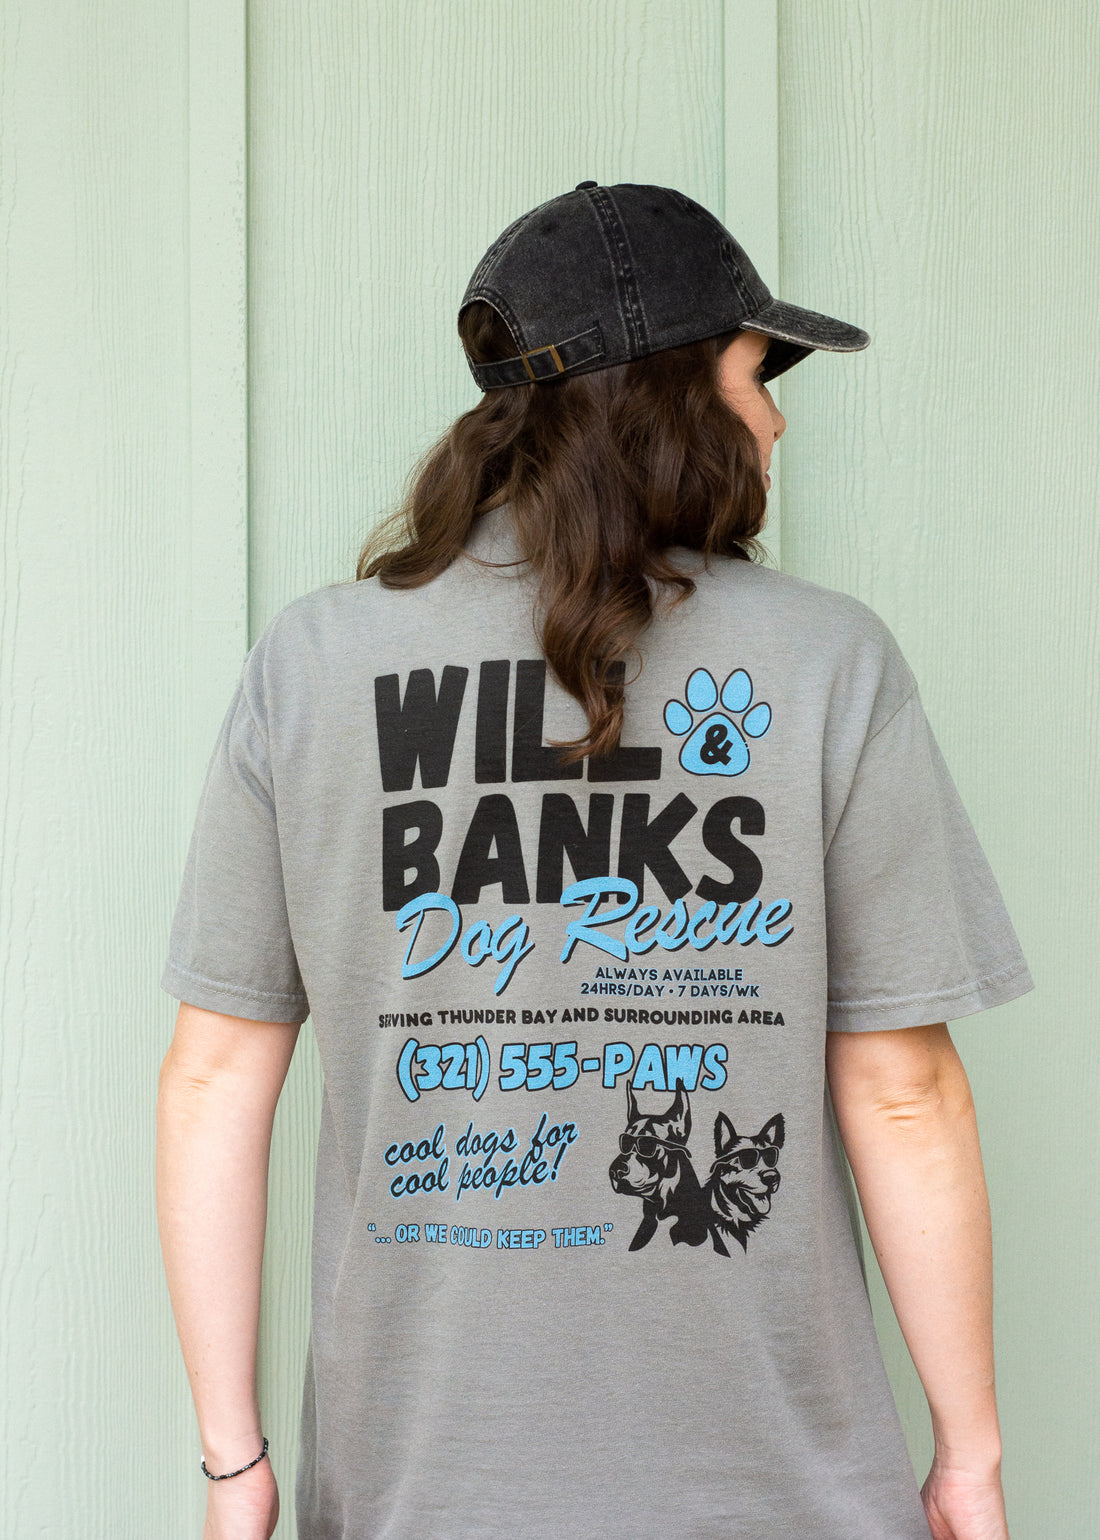 Will and Banks Dog Rescue Tee